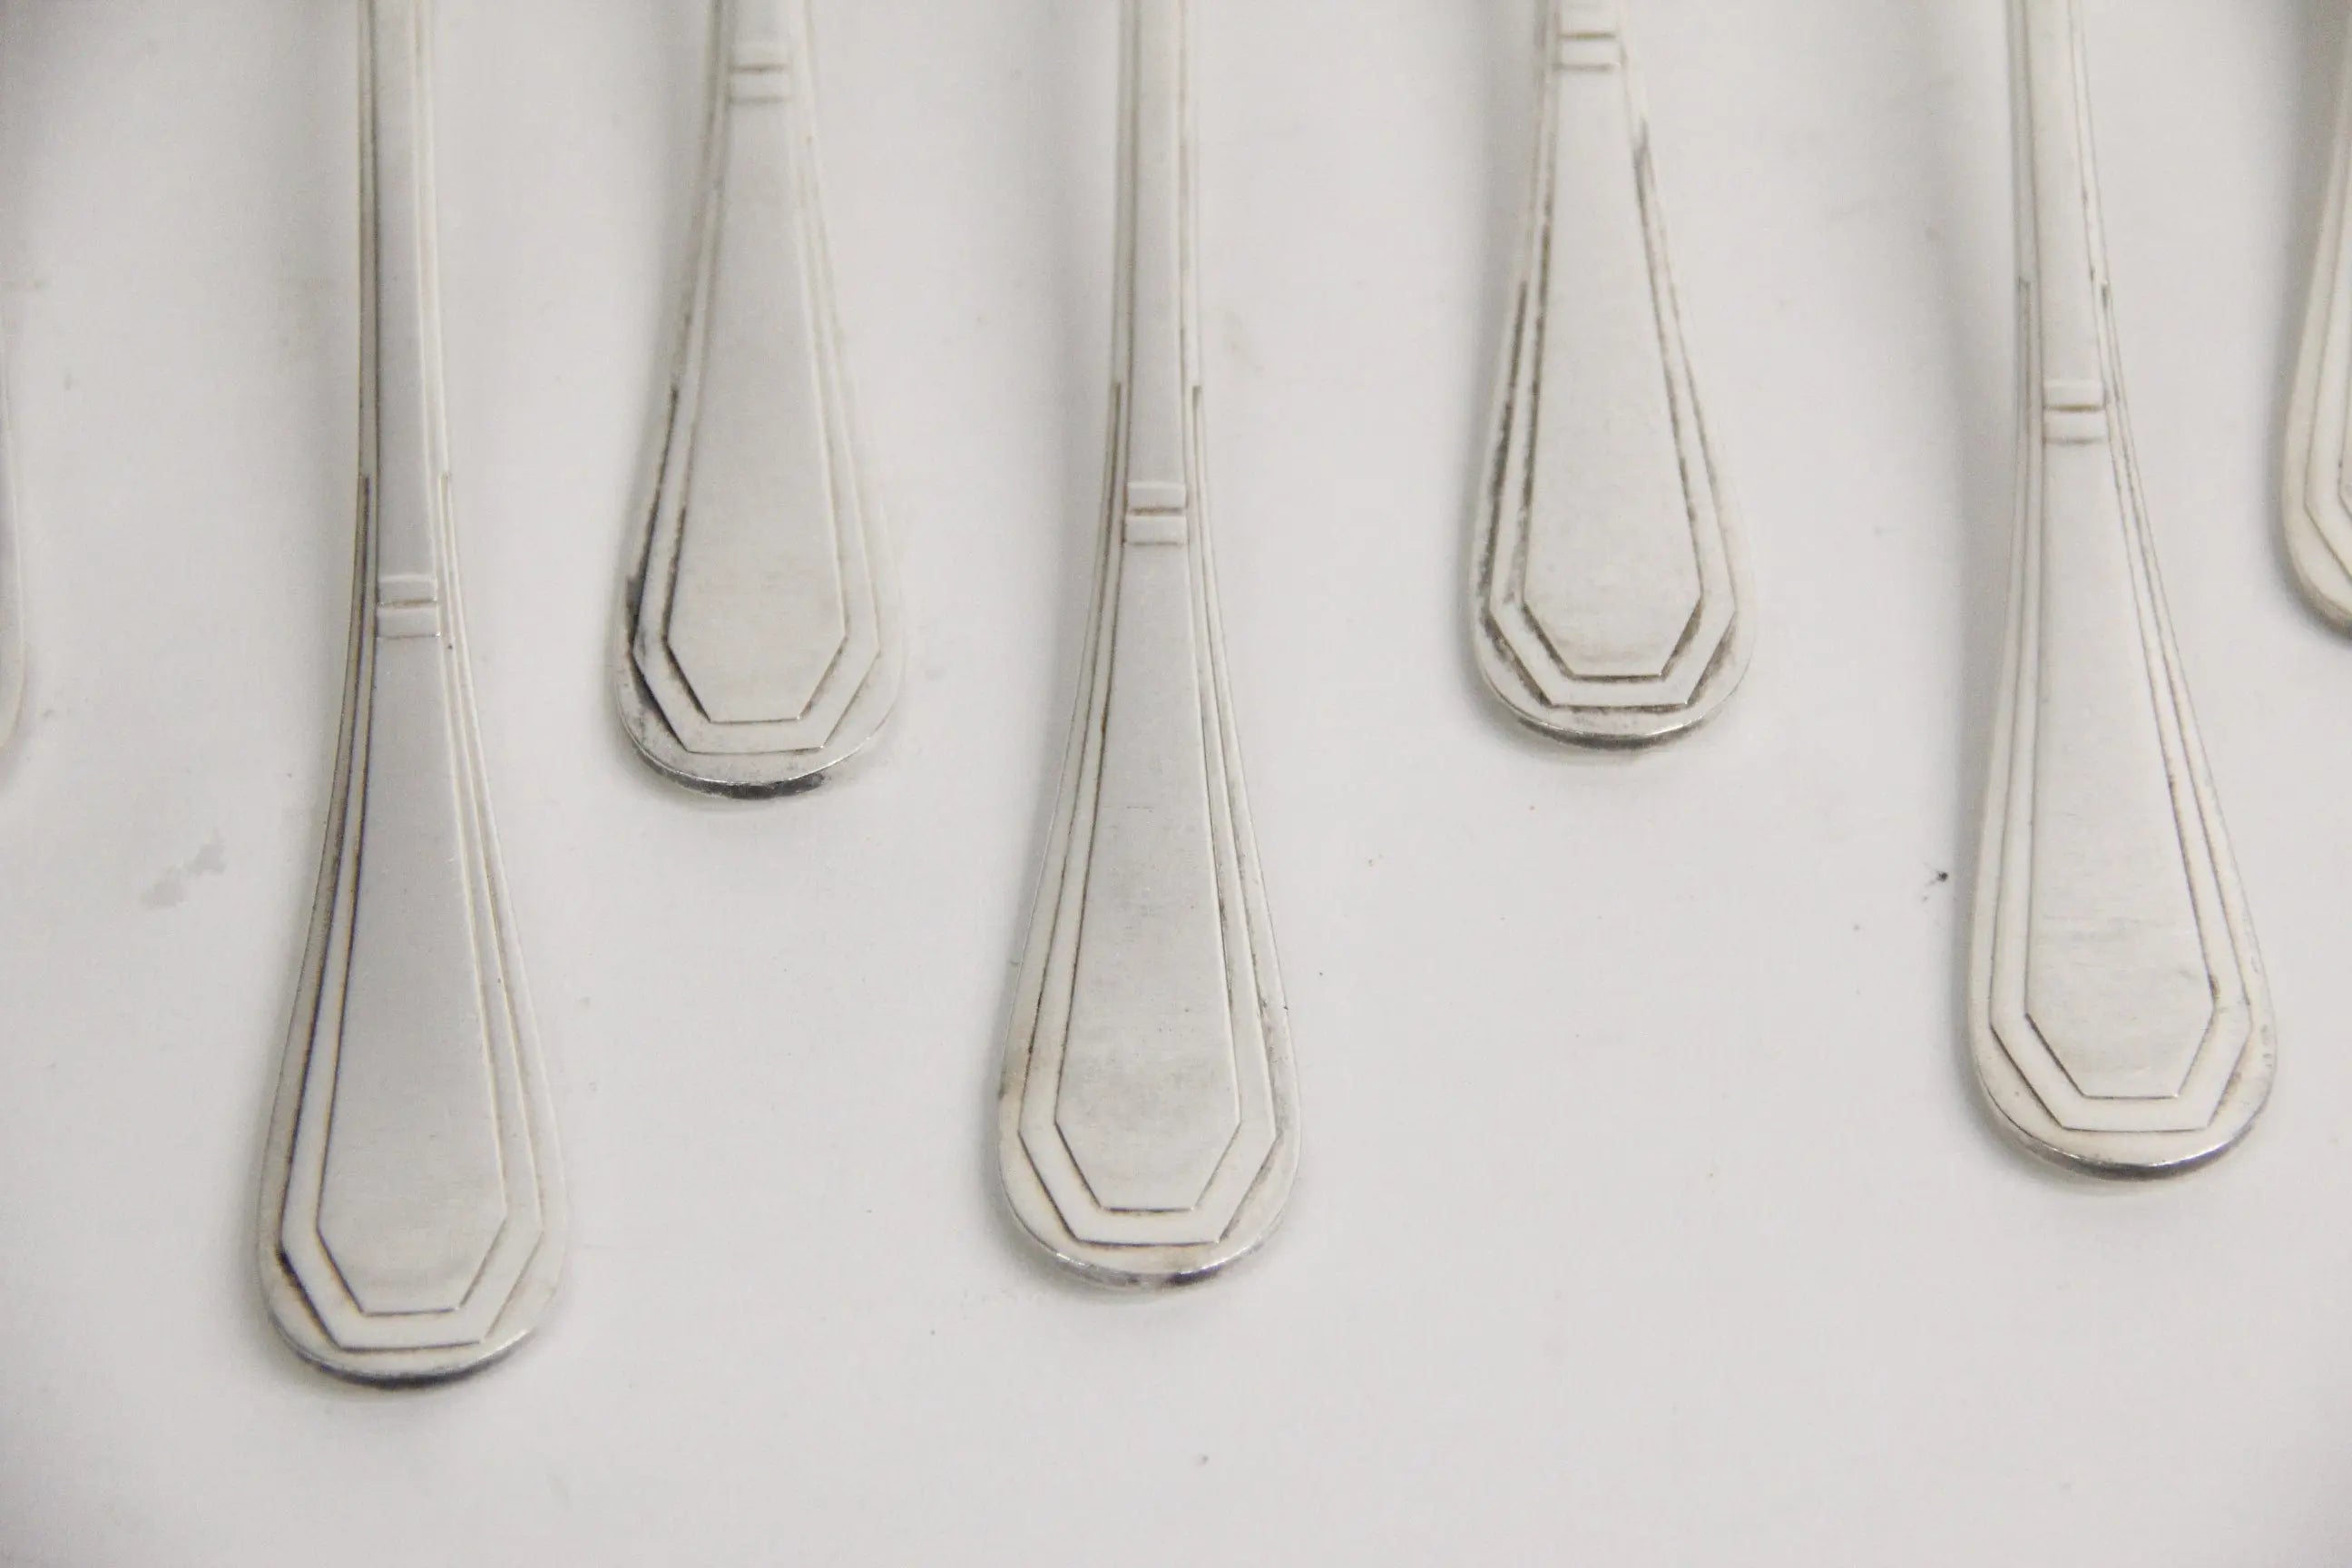 Vintage French Flatware | Tablespoons  Debra Hall Lifestyle